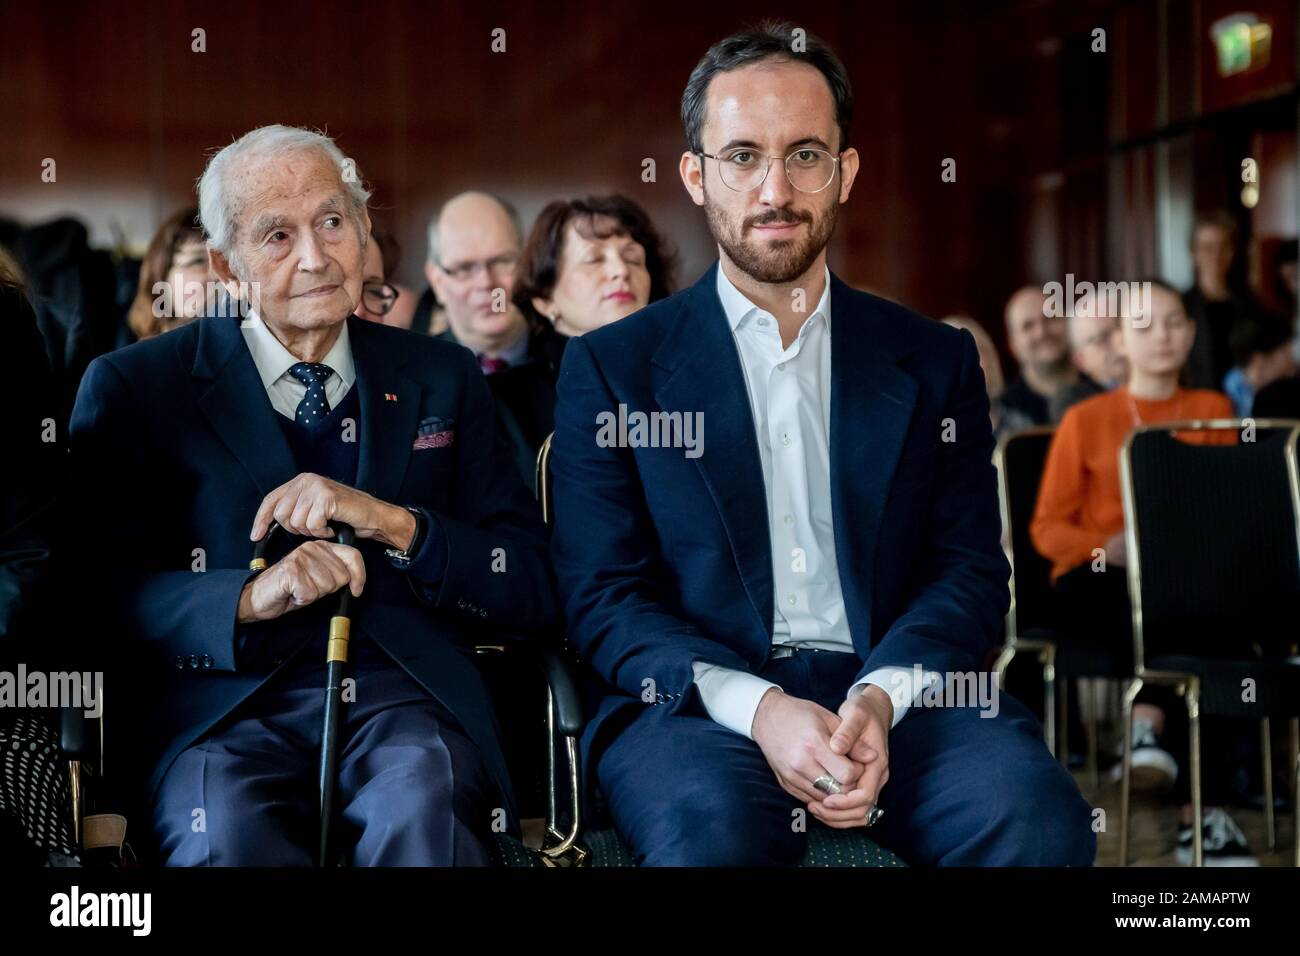 12 January 2020, Berlin: Igor Levit (r), pianist, and Leon Schwarzbaum, Holocaust survivor, sit next to each other with the statue 'B' as a 'Gift of Memory' at an event to honour Levit by the International Auschwitz Committee at the Maritim Hotel Berlin. The statue is modelled on the letter 'B' in the lettering 'ARBEIT MACHT FREI' above the Auschwitz gate, which the prisoners in Auschwitz had secretly turned upside down when they had to manufacture the sign on the orders of the SS. For the prisoners this action was a sign of their human dignity and resistance. Photo: Christoph Soeder/dpa Stock Photo